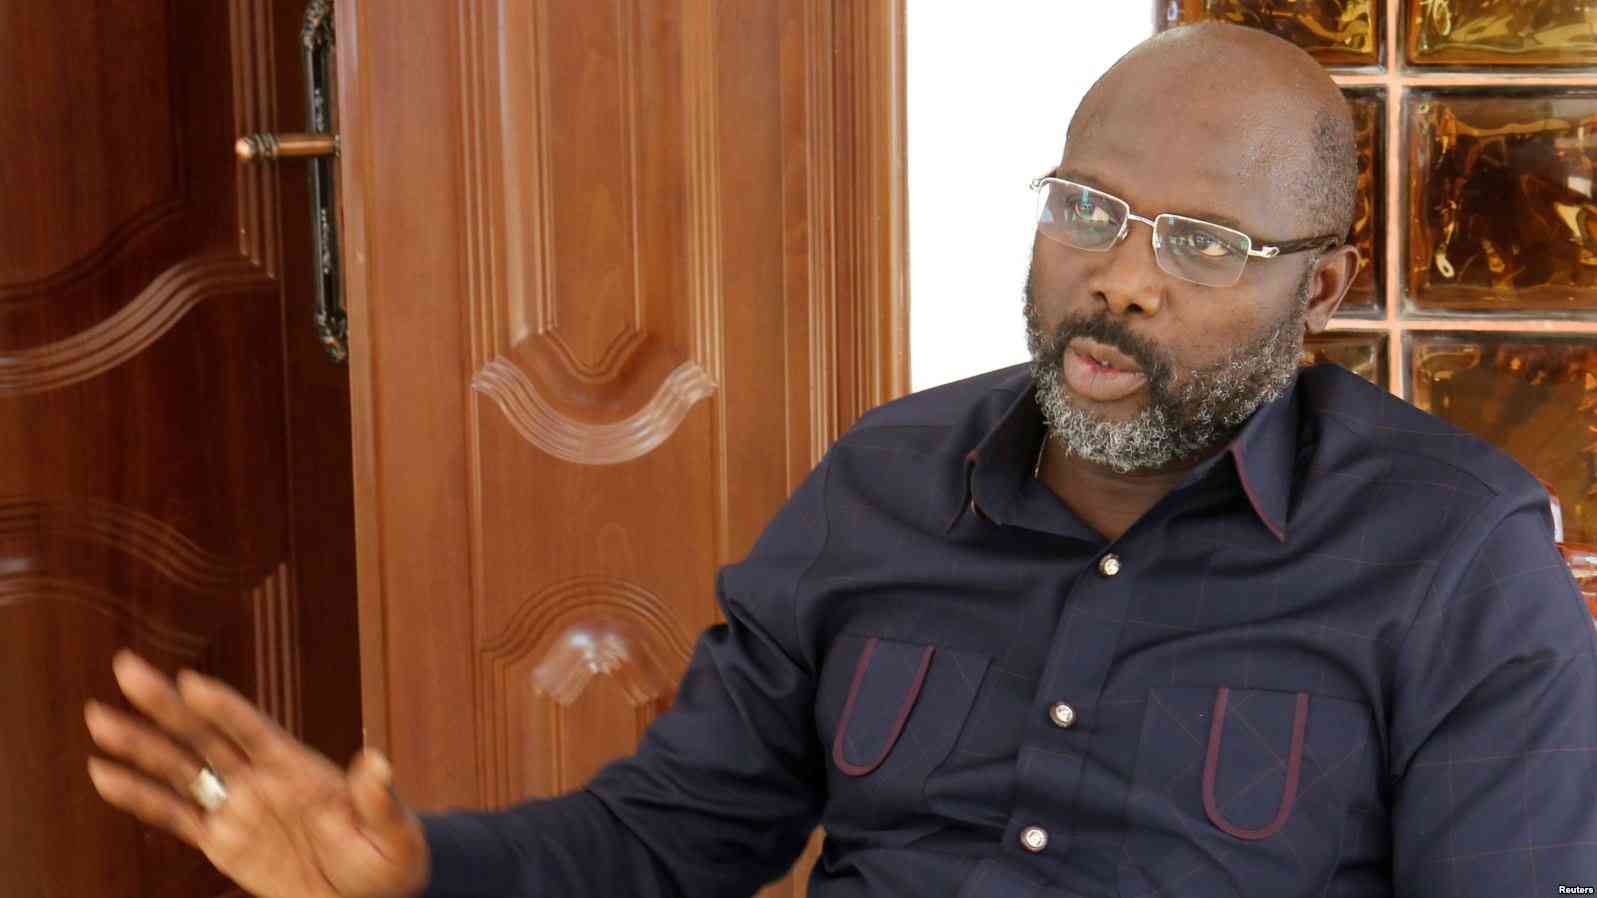 President-elect George Weah of the Coalition for Democratic Change (CDC) speaks during an interview with Reuters at his residence in Monrovia, Liberia, Jan. 2, 2018.